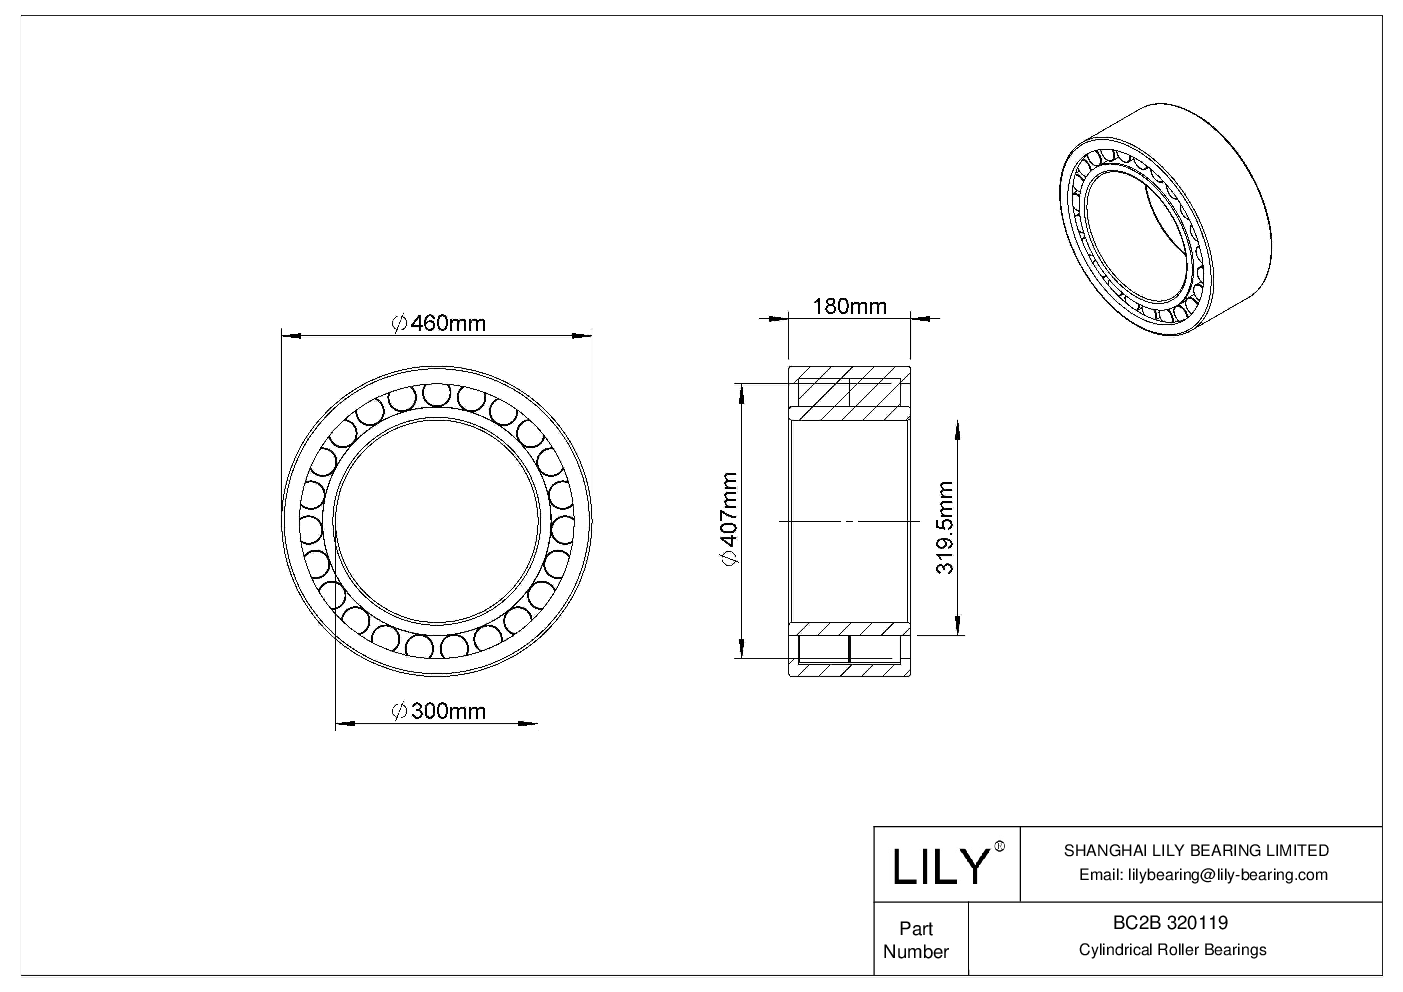 BC2B 320119 Double Row Cylindrical Roller Bearings cad drawing